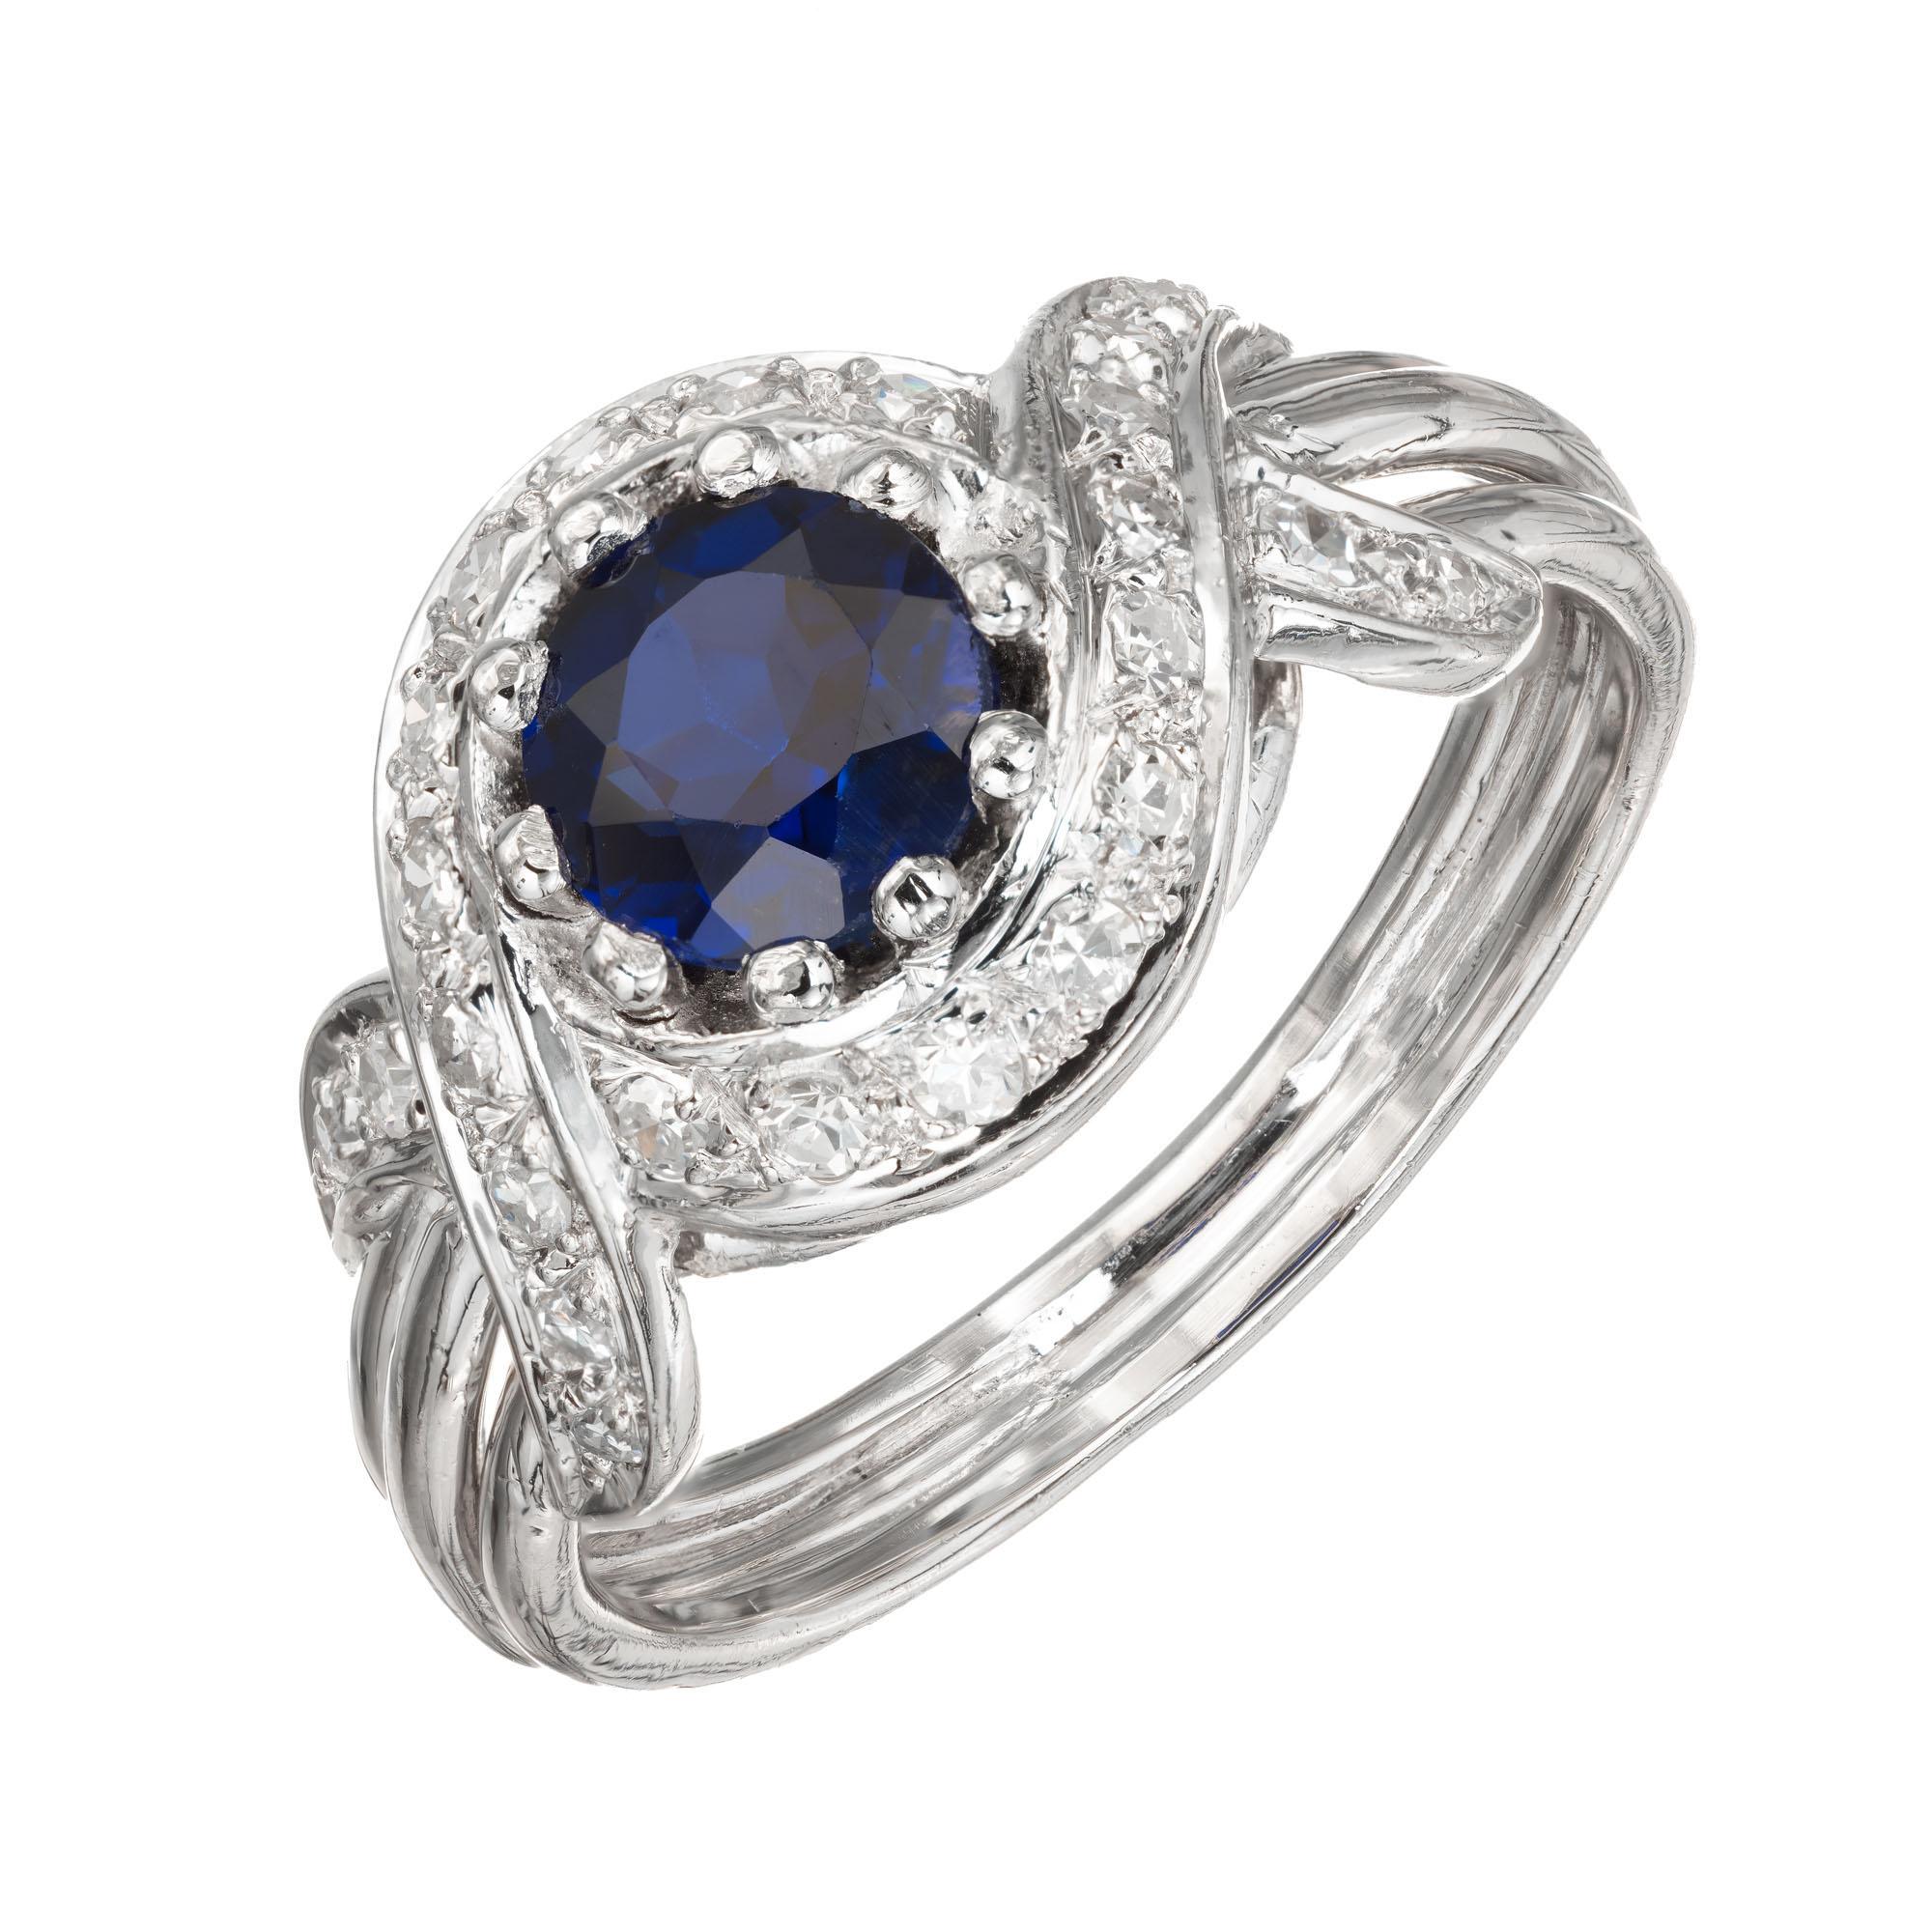 Sapphire and diamond engagement ring. Round Ceylon center stone in a handmade wire ring with a halo of round diamonds in a Platinum swirl design setting.  circa 1970.

1 round Sapphire approx. total weight 1.03cts, 5.8mm
24 round diamonds approx.